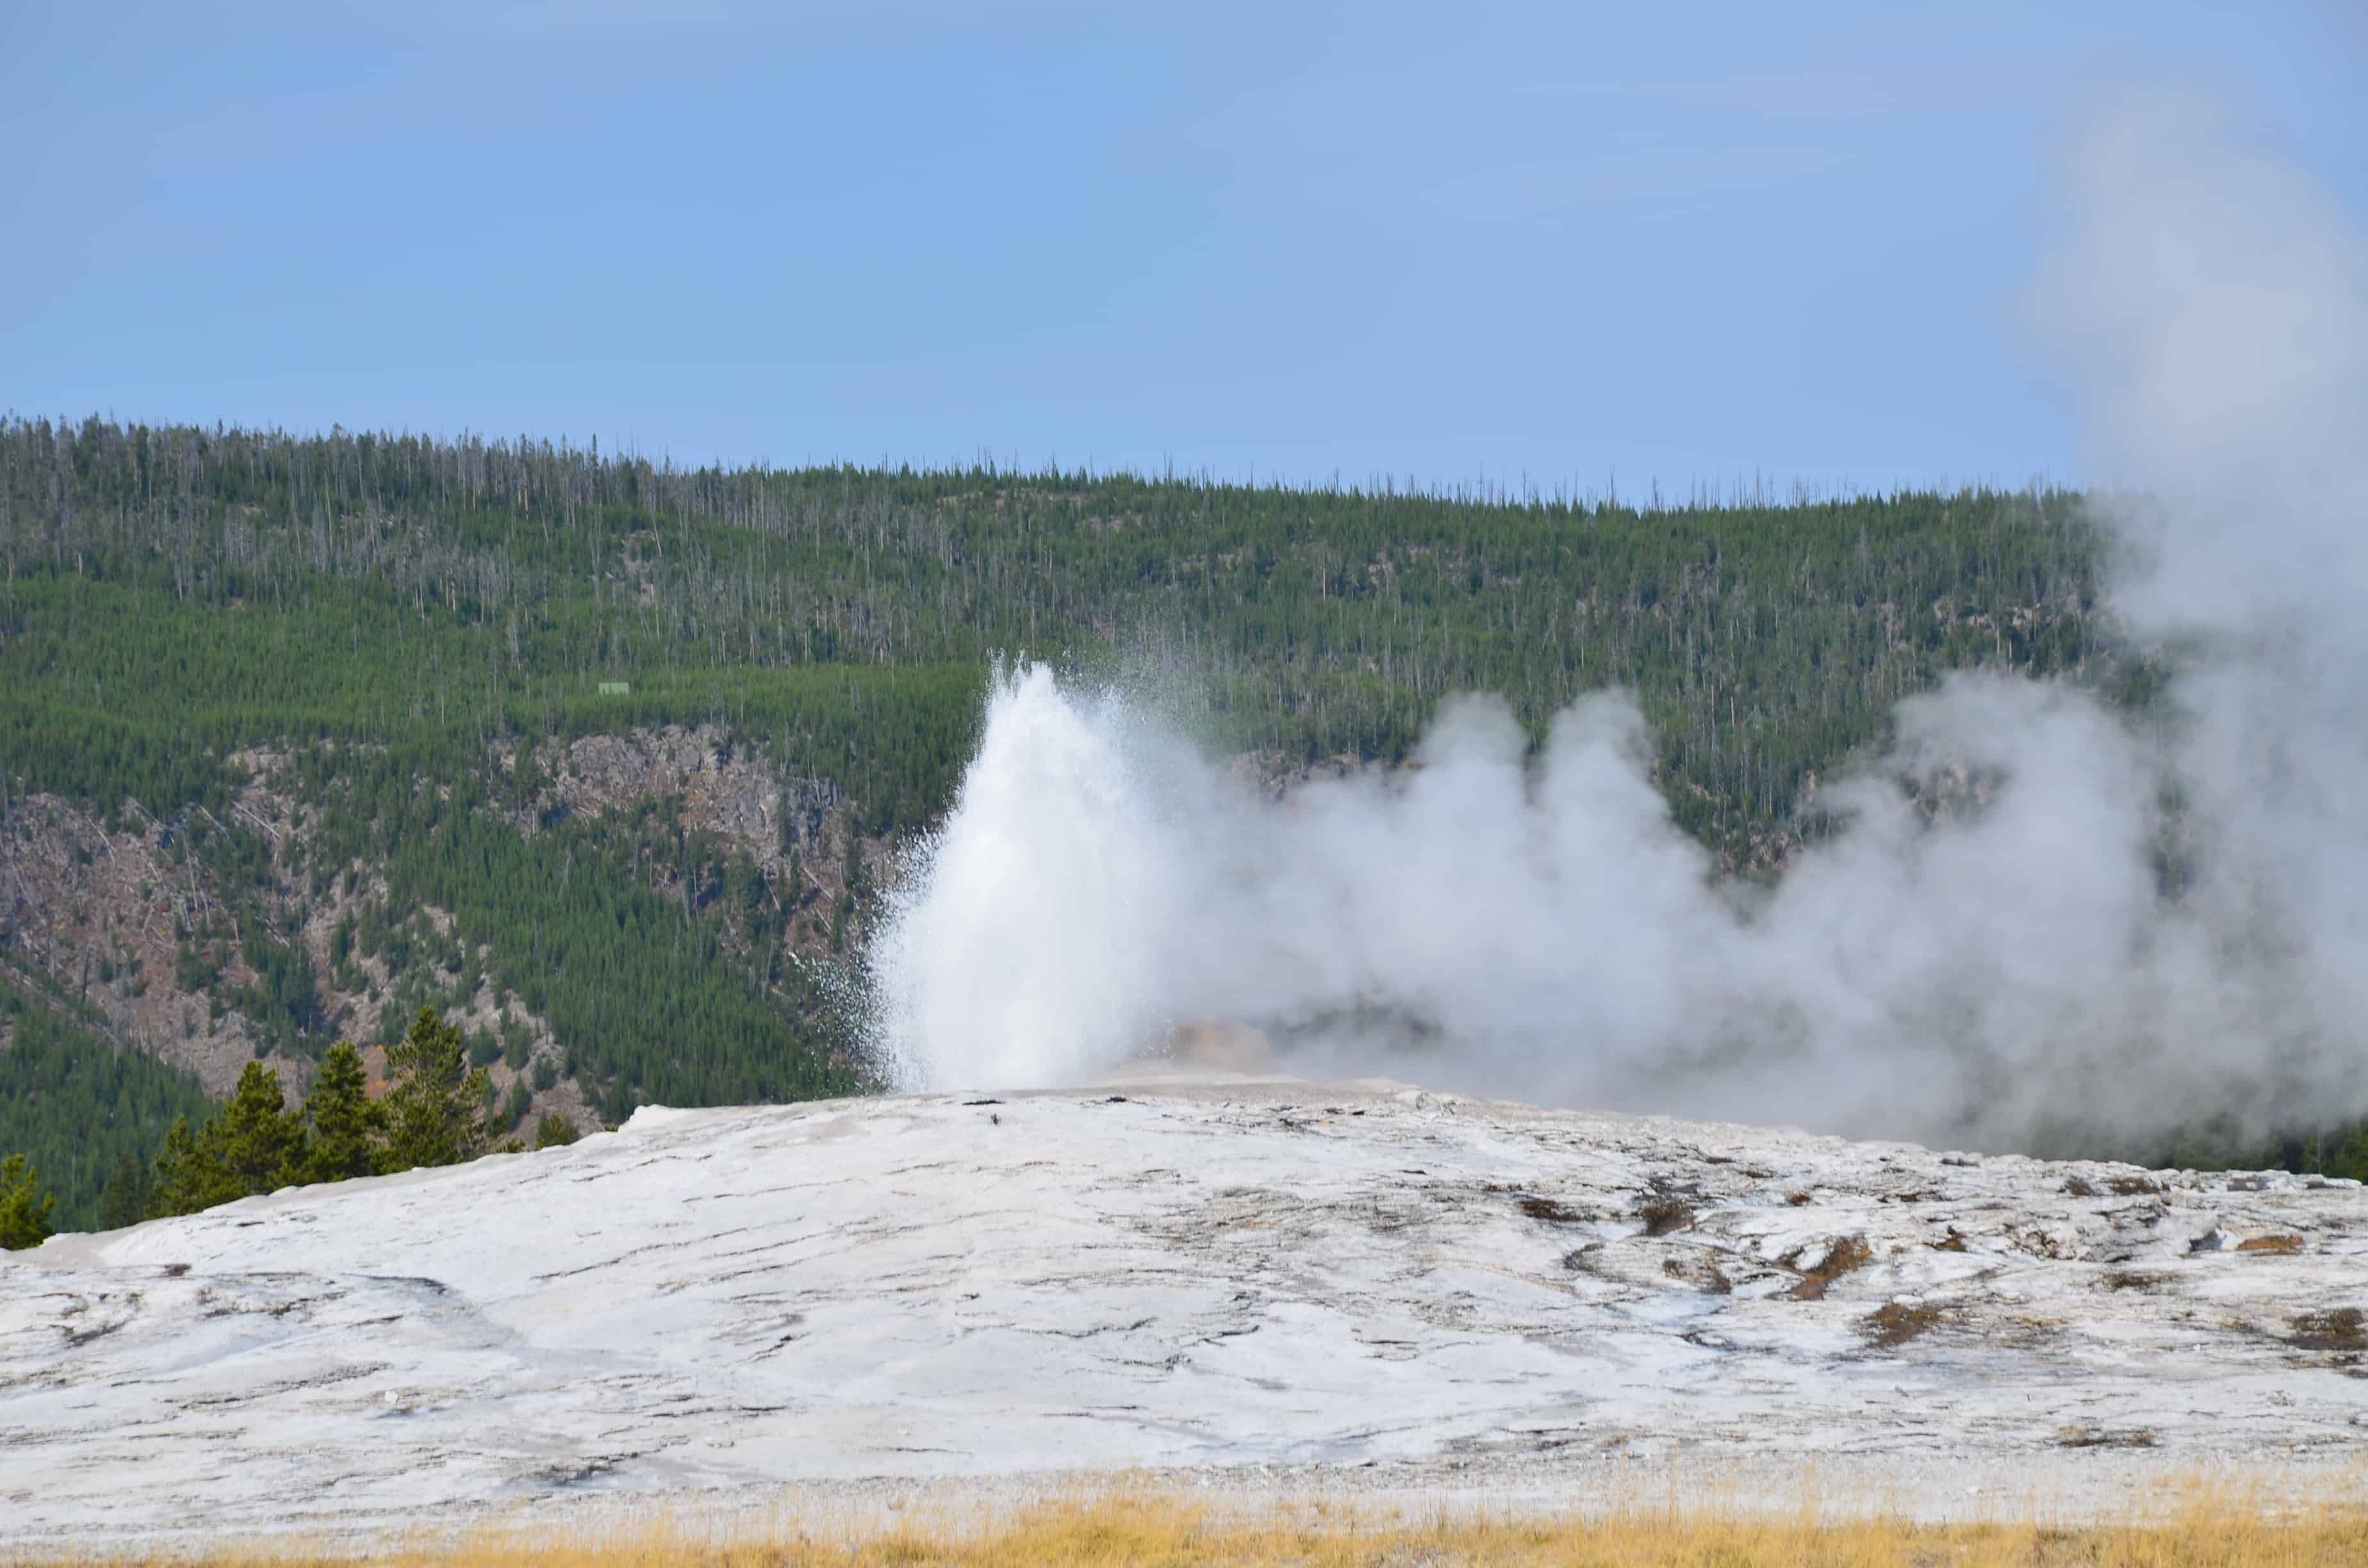 Old Faithful at the Upper Geyser Basin in Yellowstone National Park, Wyoming